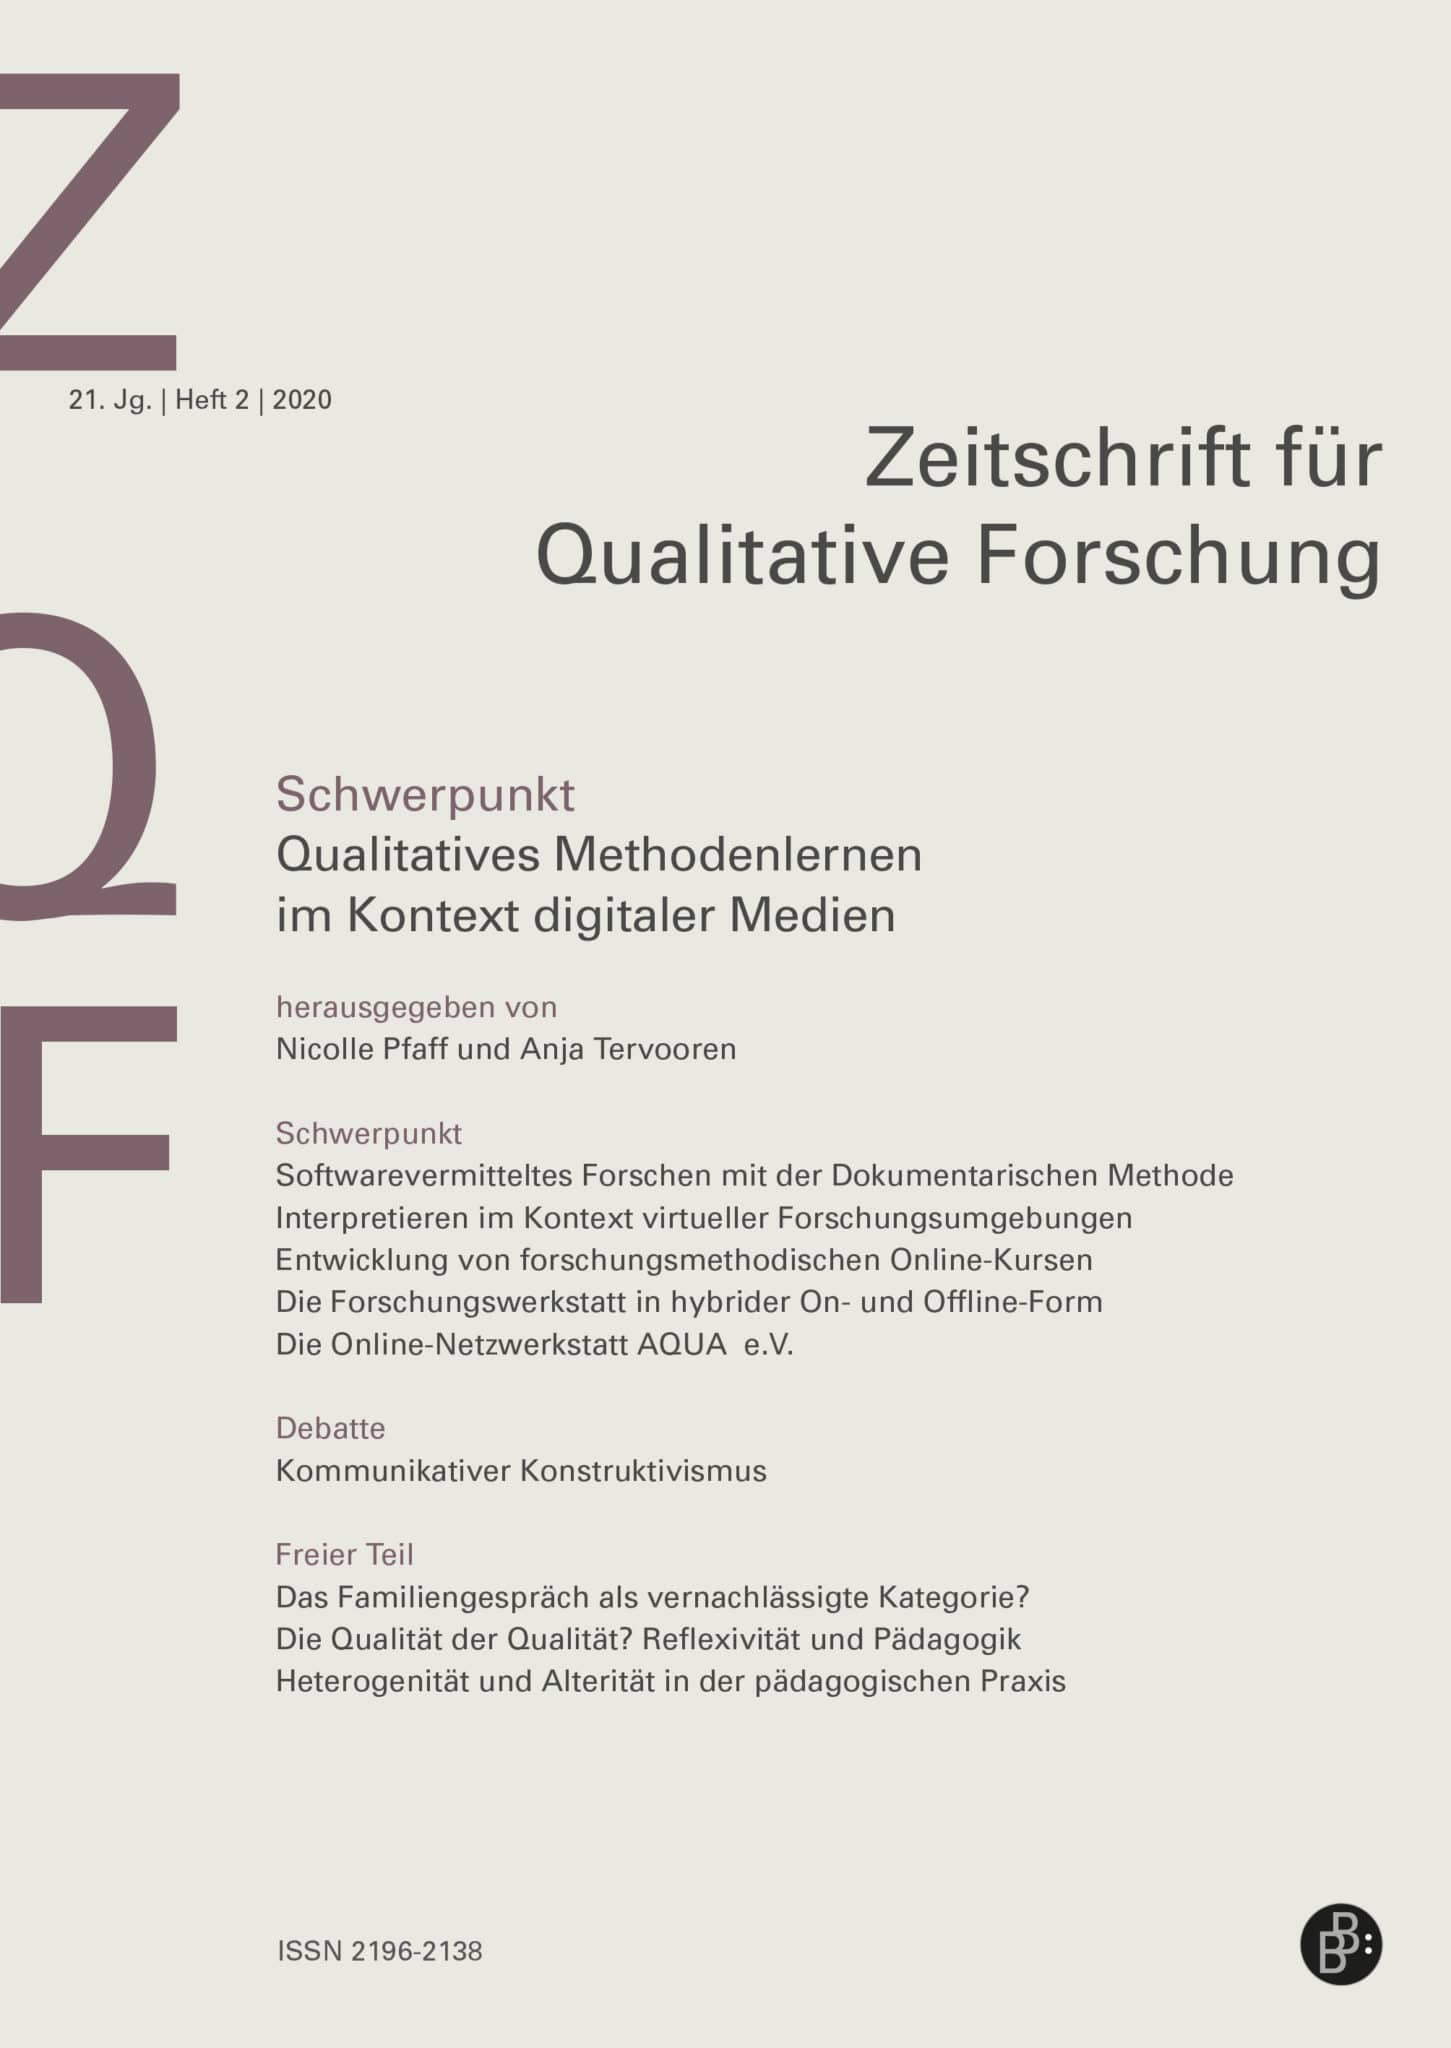 ZQF_Quali Methodenlernen_Cover